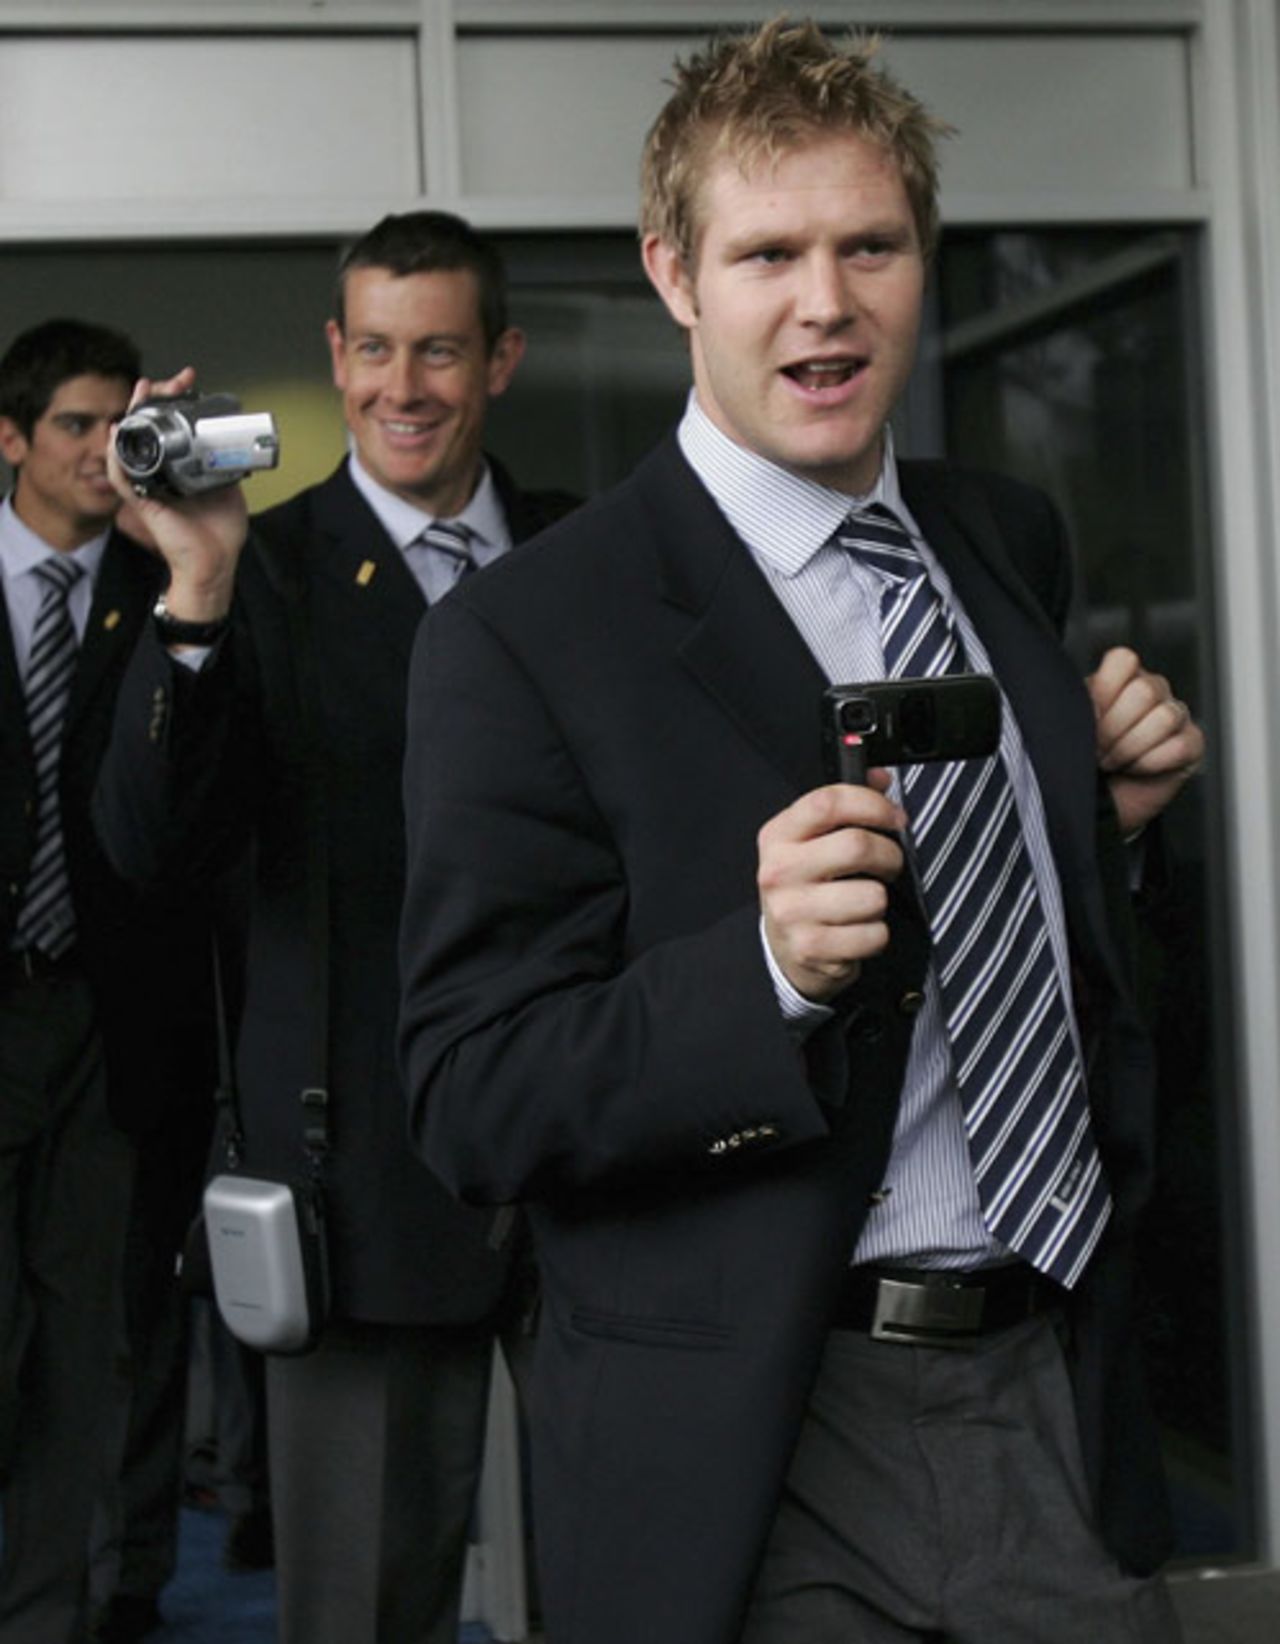 Matthew Hoggard and Ashley Giles (behind) film their arrival at Sydney airport for England's tour of Australia, Sydney, November 5, 2006